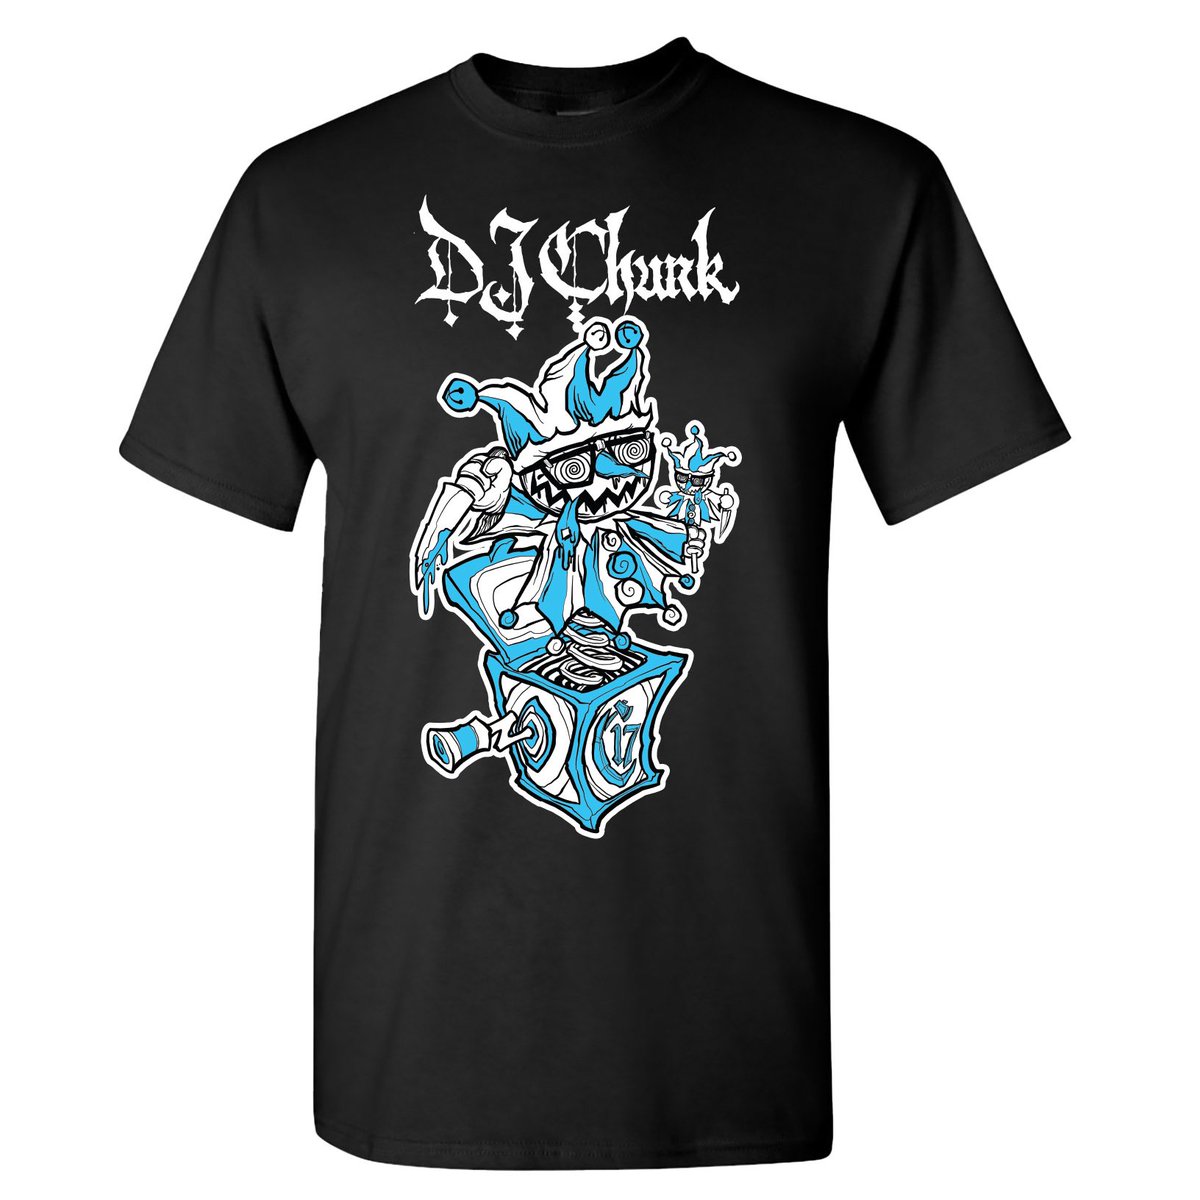 🆕NEW SHIRTS ARE LIVE🆕 Chunk n Tha Box is up available for preorder!! Another collab with Undyingart and of course we only printing with Relish Brand 🎨 🫢I hook up every order with extras if you’re new here n had to get told djchunk.bigcartel.com